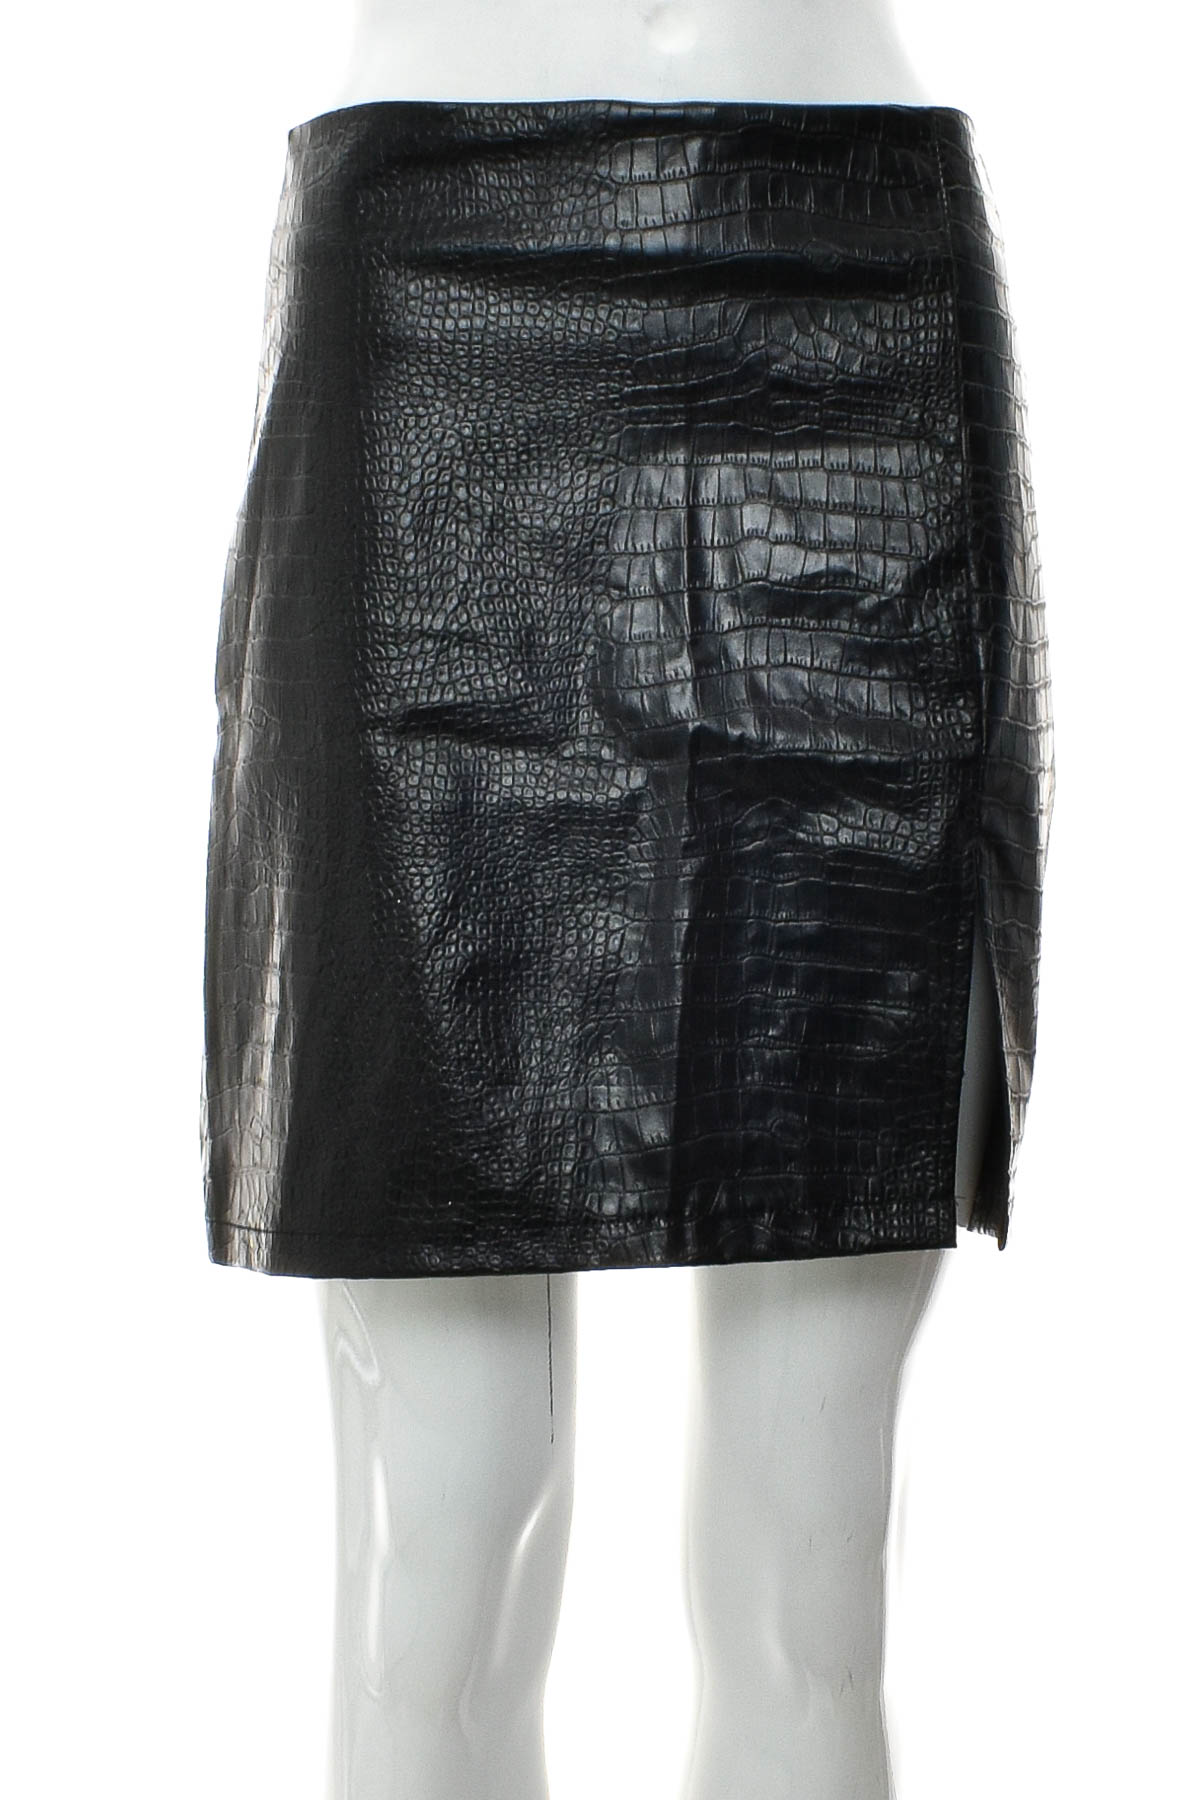 Leather skirt - SHEIN - 0